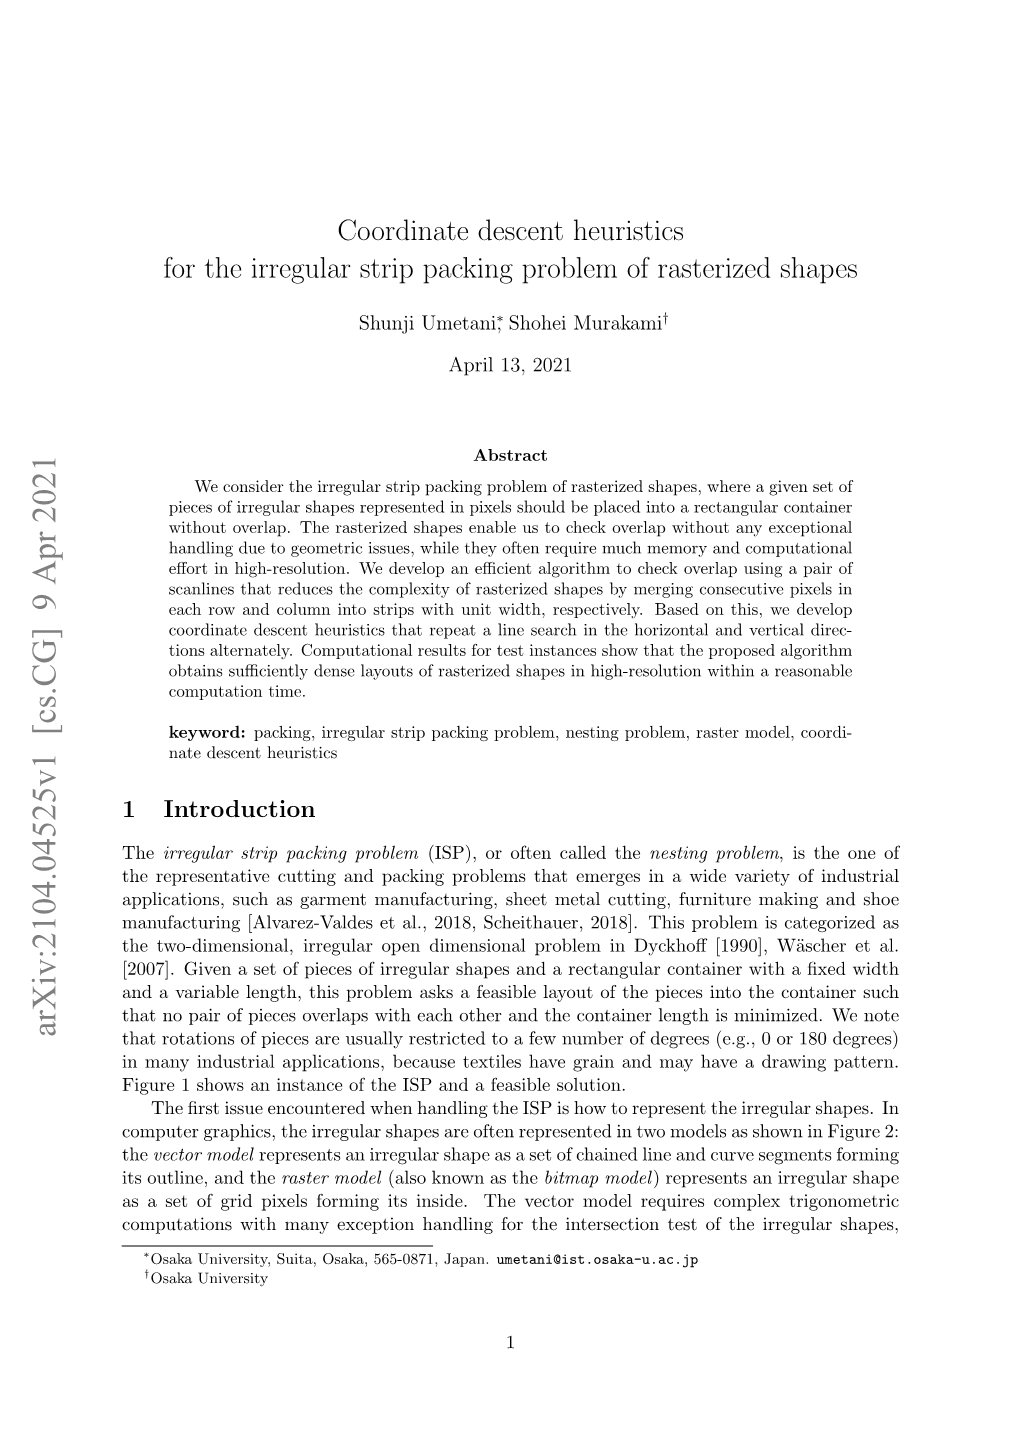 Coordinate Descent Heuristics for the Irregular Strip Packing Problem of Rasterized Shapes